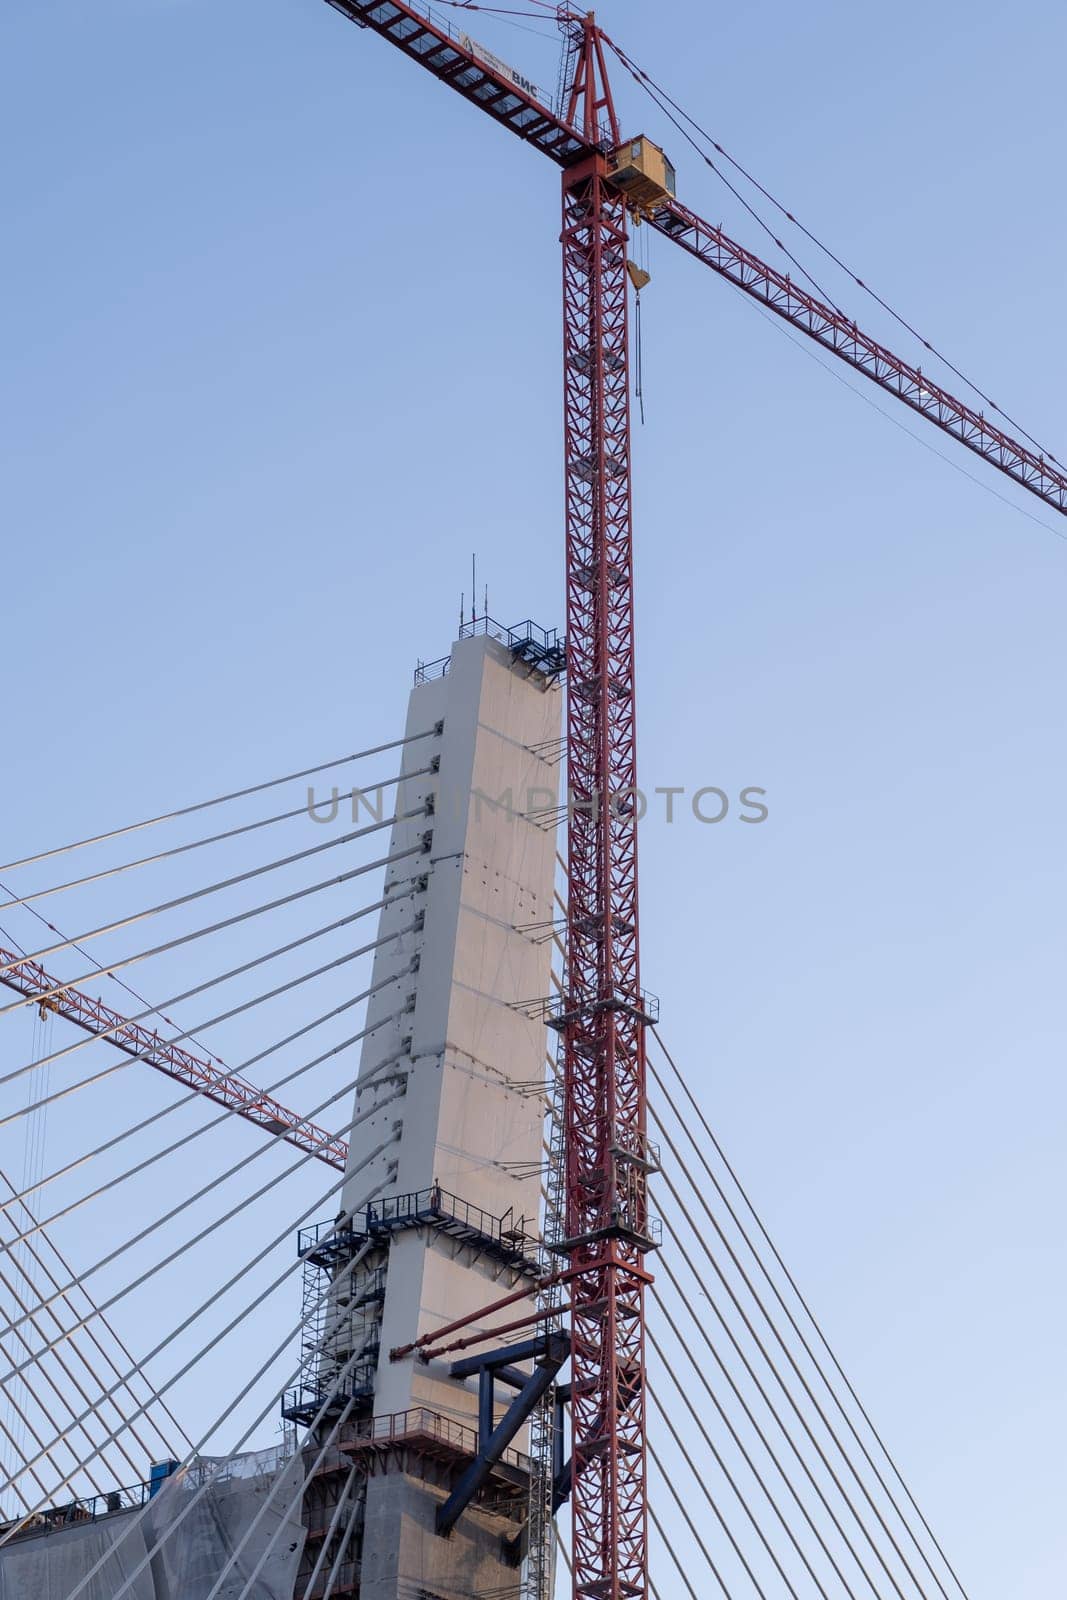 Crane and bridge construction against a blue sky background. Builders work on large construction sites, and there are many cranes working. There are a lot of cables on the bridge